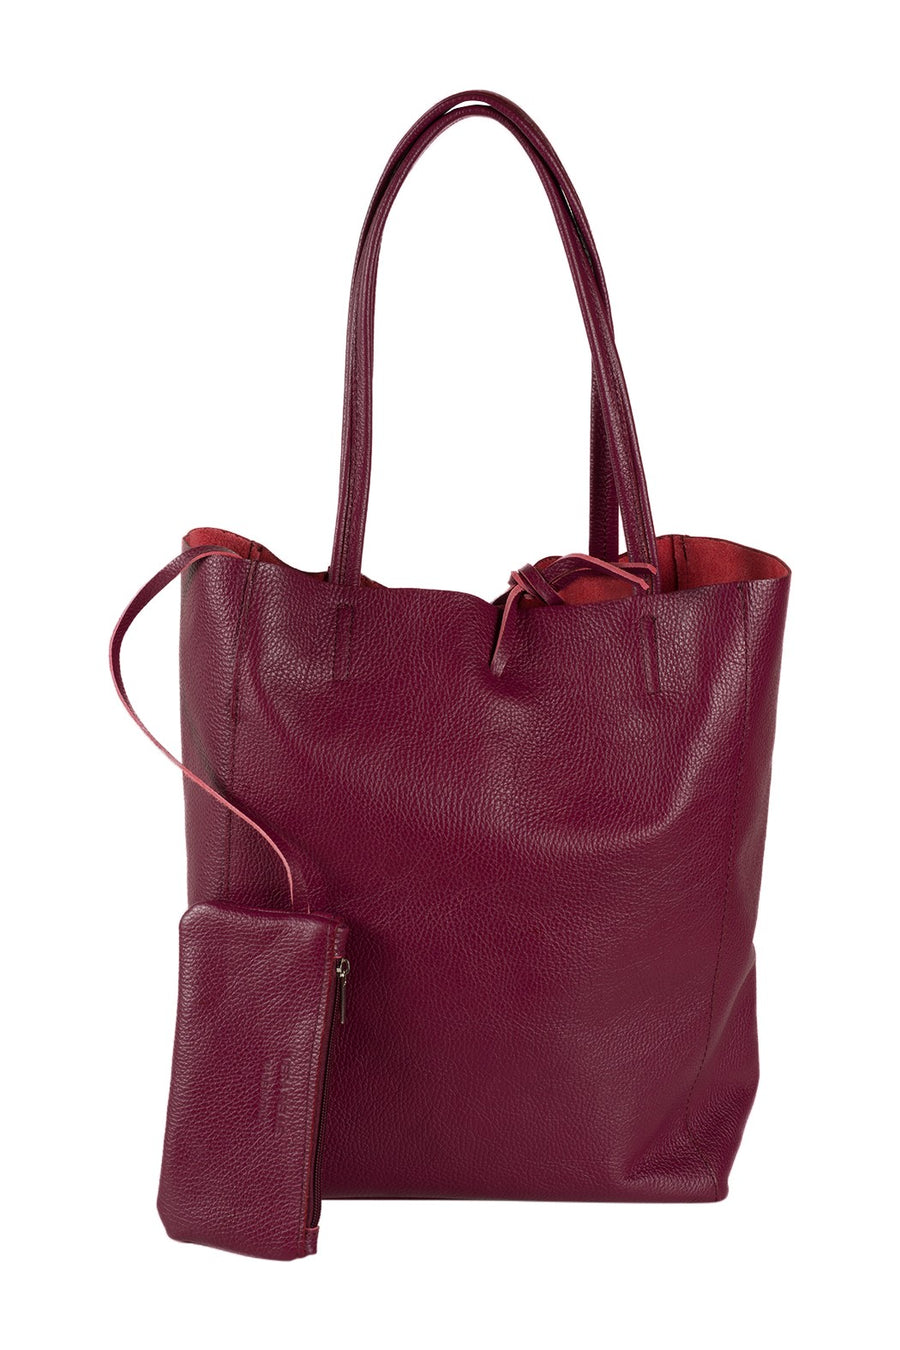 Italian leather shopper tote bag tie top bordeaux with attached internal wallet pouch